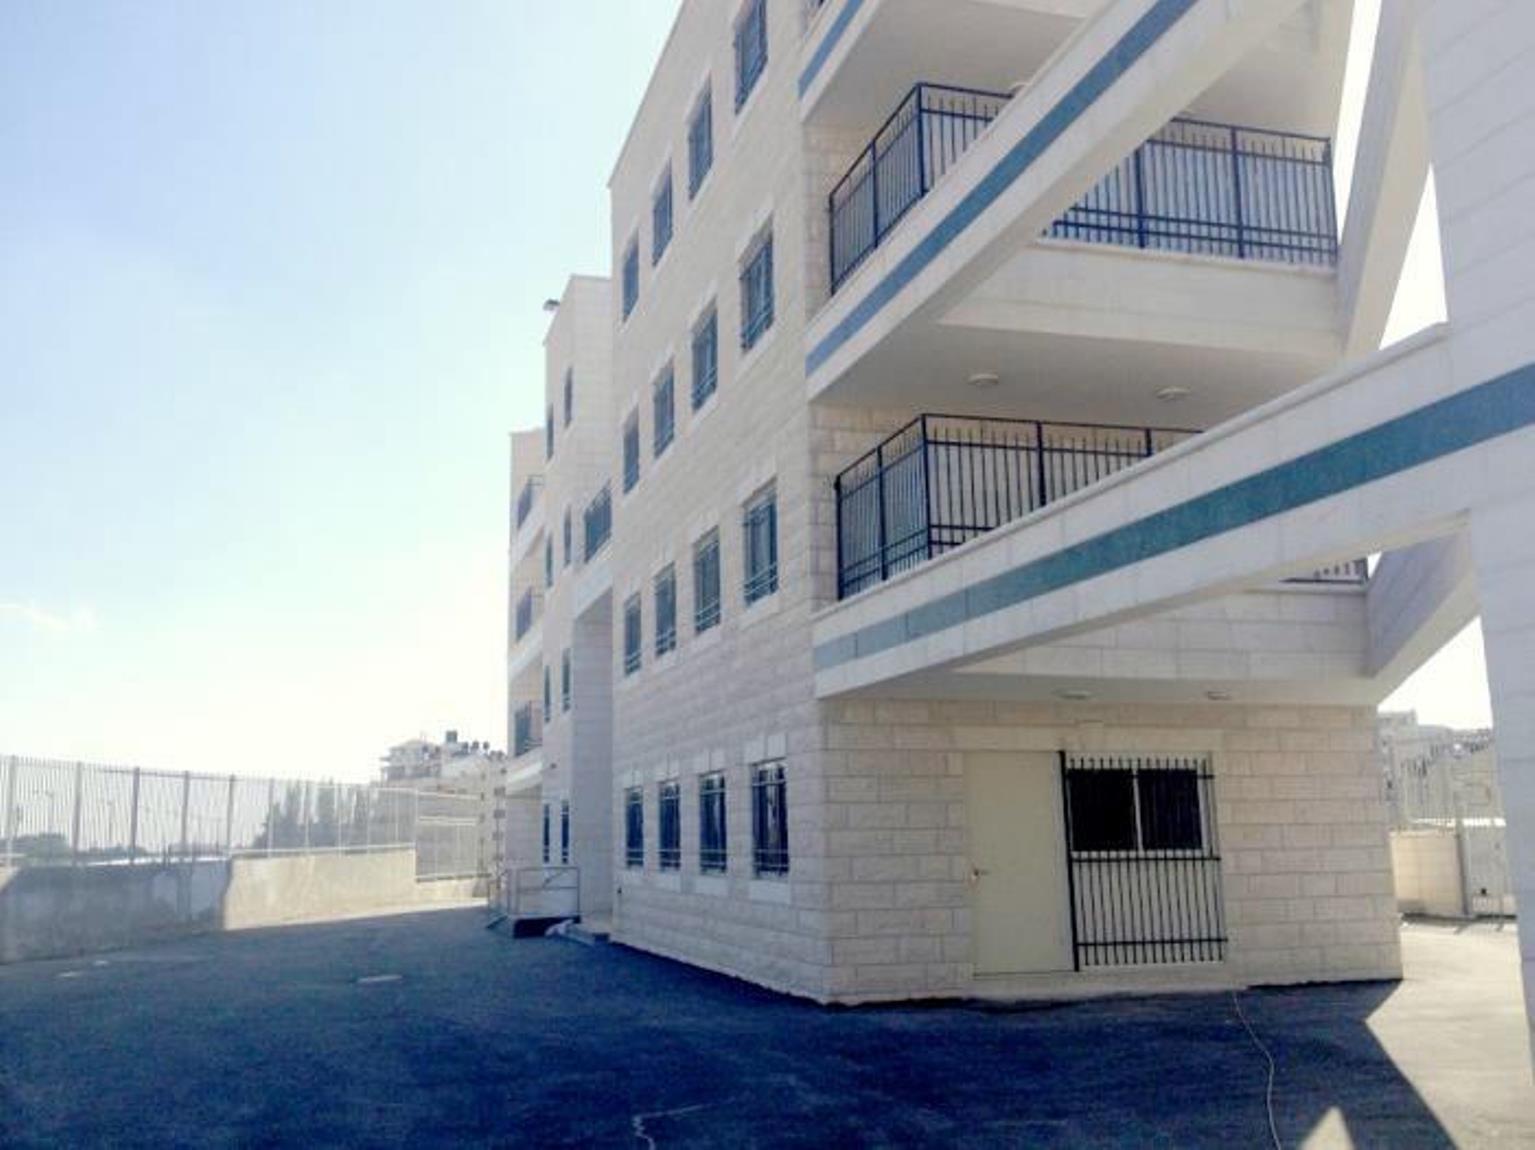 The School of Technology in Beit Hanina opened in January 2015 for gifted East Jerusalem Arab boys to learn STEM subjects. Photo courtesy of the Jerusalem Education Administration